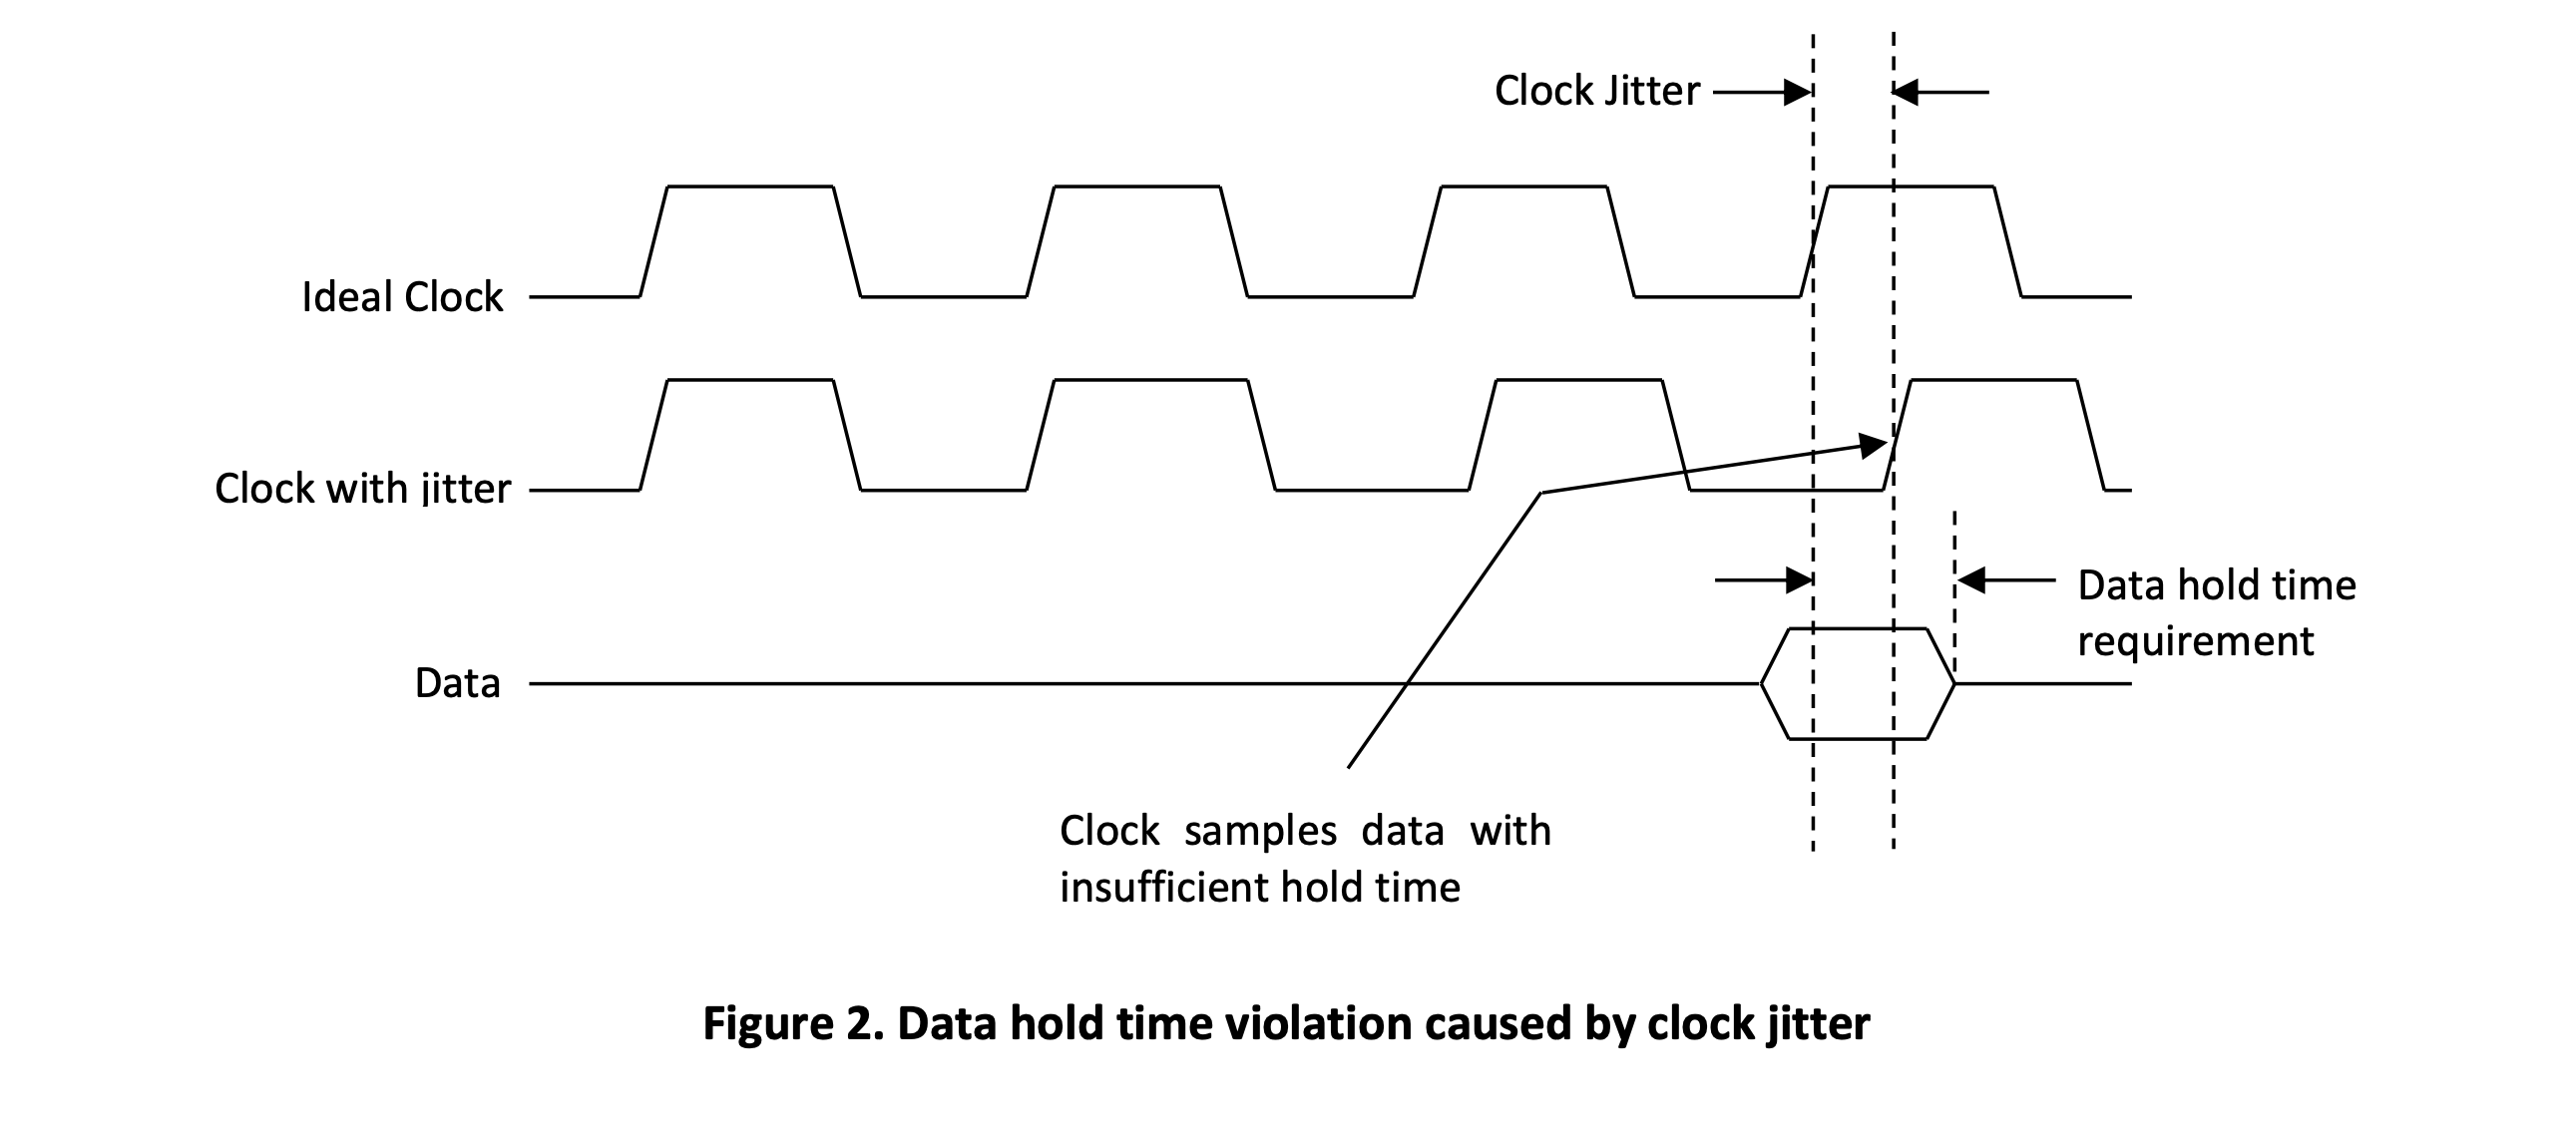 Data hold time violation caused by clock jitter